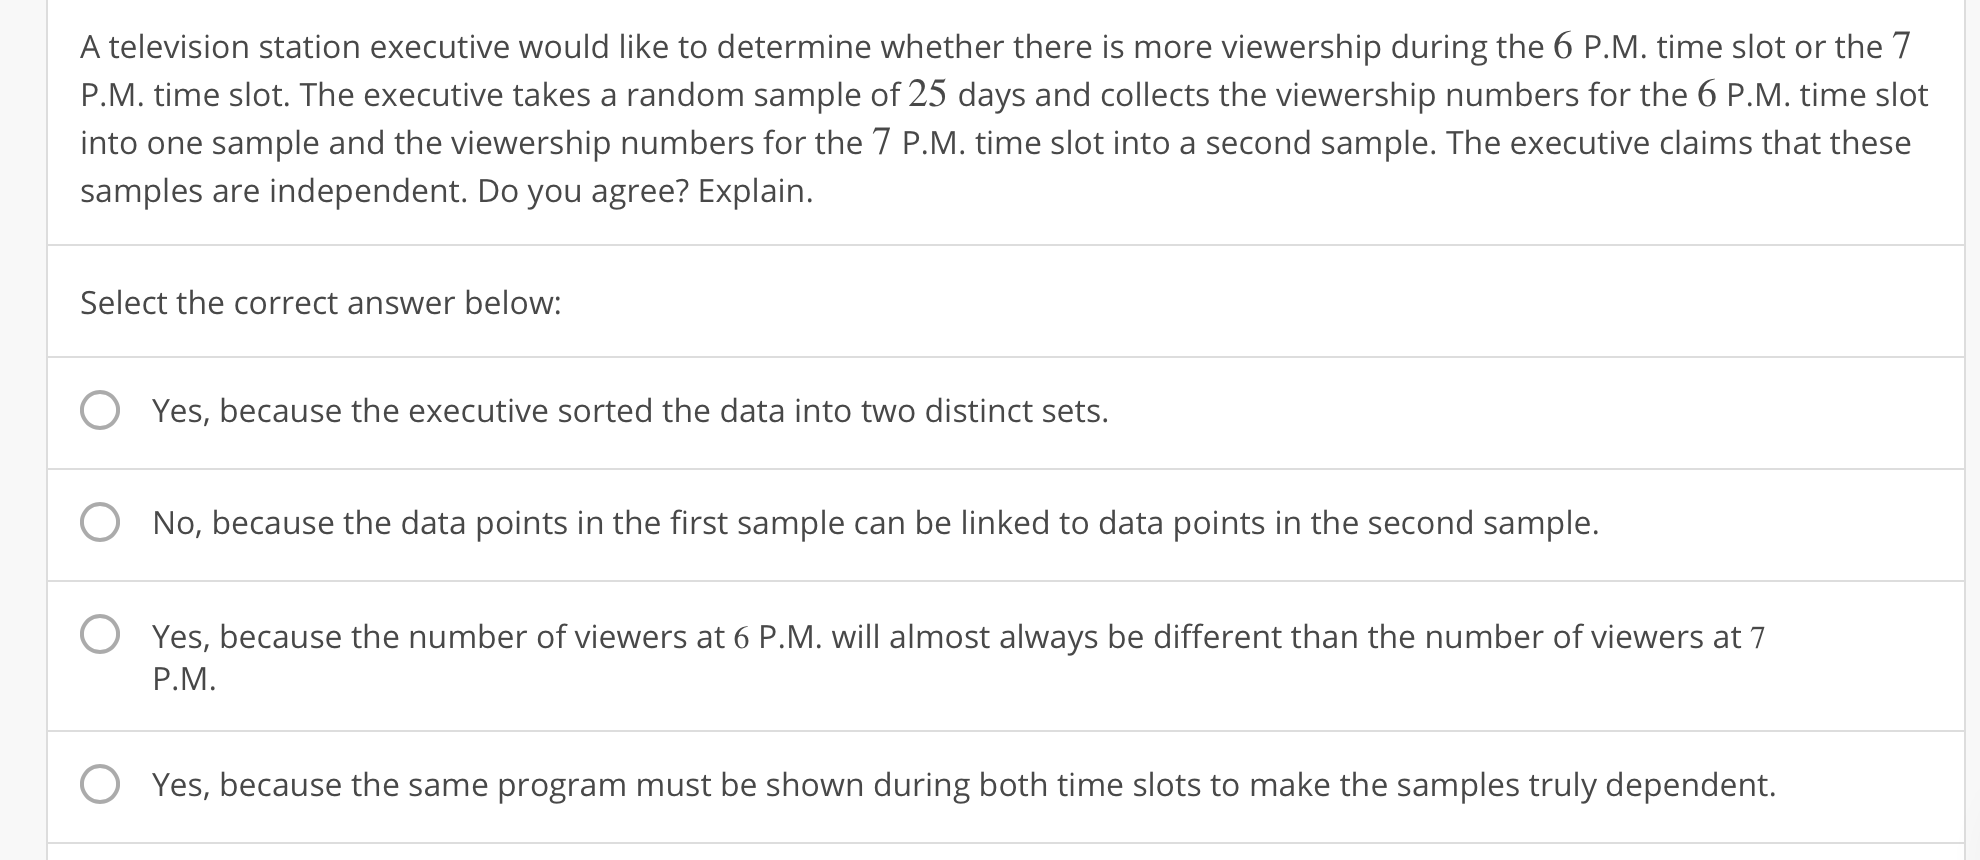 A television station executive would like to determine whether there is more viewership during the 6 P.M. time slot or the7
P.M. time slot. The executive takes a random sample of 25 days and collects the viewership numbers for the 6 P.M. time slot
into one sample and the viewership numbers for the 7 P.M. time slot into a second sample. The executive claims that these
samples are independent. Do you agree? Explain.
Select the correct answer below
O Yes, because the executive sorted the data into two distinct sets.
O No, because the data points in the first sample can be linked to data points in the second sample.
O Yes, because the number of viewers at 6 P.M. will almost always be different than the number of viewers at 7
P.M.
O
Yes, because the same program must be shown during both time slots to make the samples truly dependent.
